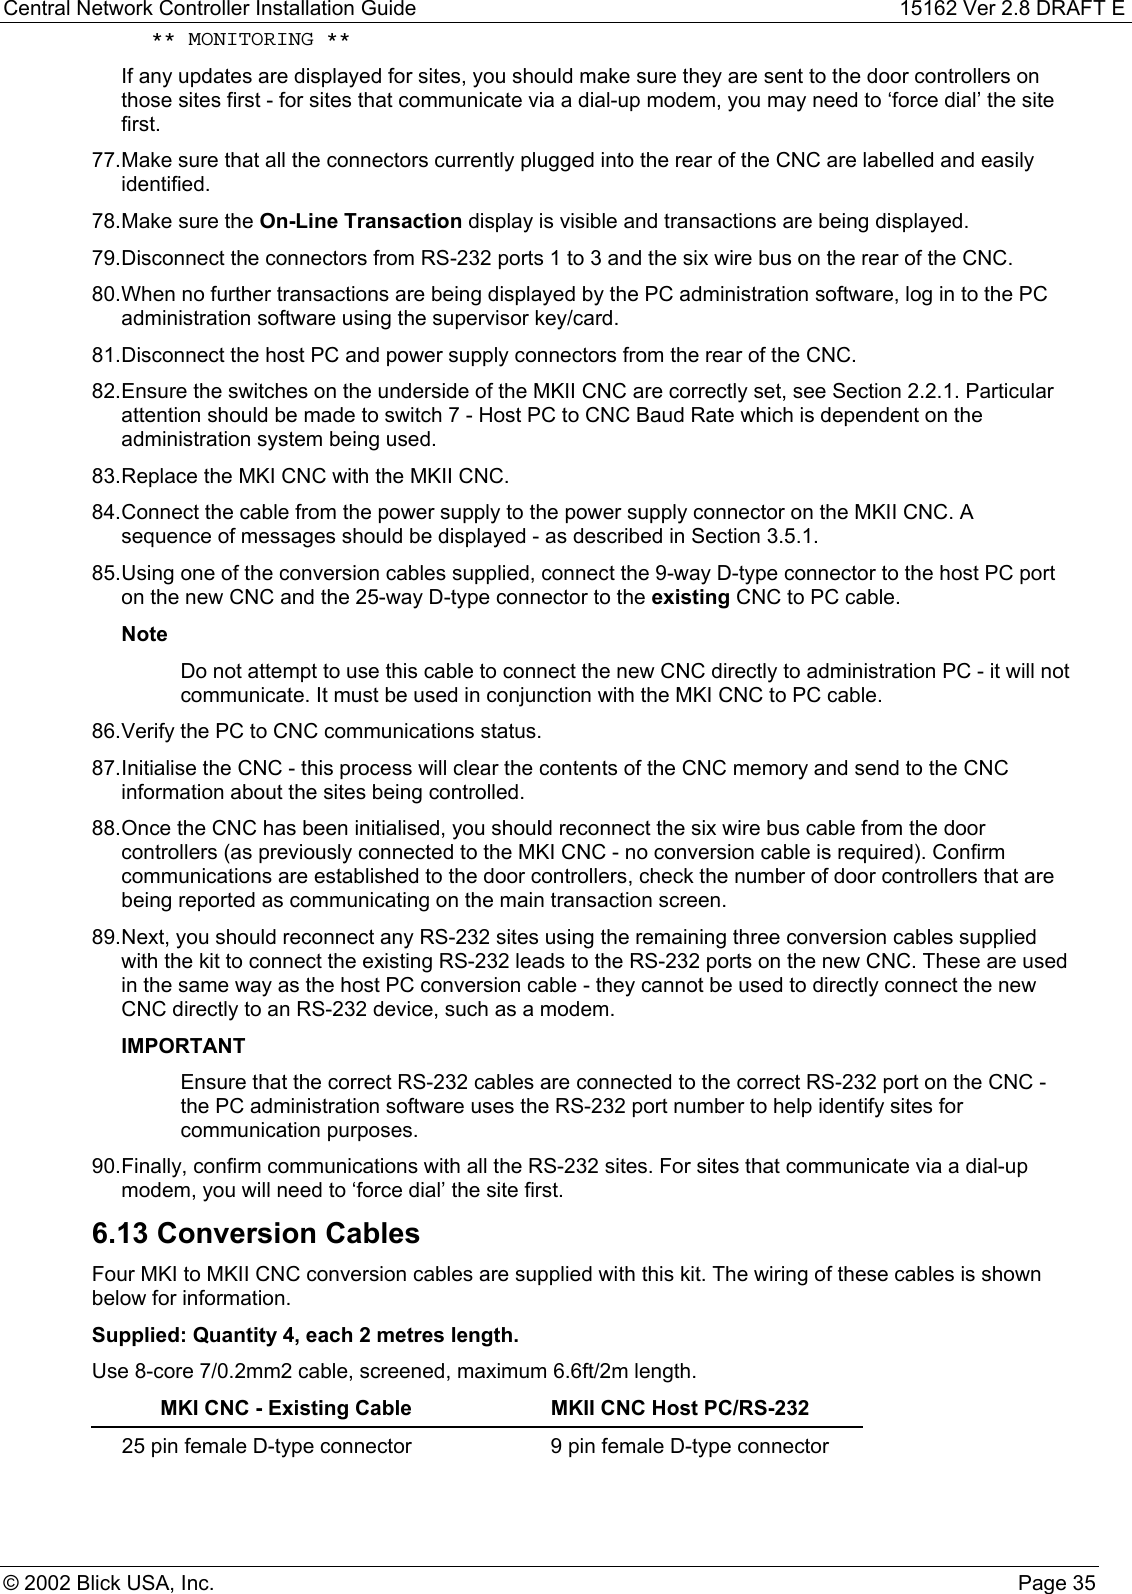 Central Network Controller Installation Guide 15162 Ver 2.8 DRAFT E© 2002 Blick USA, Inc. Page 35 ** MONITORING **If any updates are displayed for sites, you should make sure they are sent to the door controllers onthose sites first - for sites that communicate via a dial-up modem, you may need to ‘force dial’ the sitefirst.77. Make sure that all the connectors currently plugged into the rear of the CNC are labelled and easilyidentified.78. Make sure the On-Line Transaction display is visible and transactions are being displayed.79. Disconnect the connectors from RS-232 ports 1 to 3 and the six wire bus on the rear of the CNC.80. When no further transactions are being displayed by the PC administration software, log in to the PCadministration software using the supervisor key/card.81. Disconnect the host PC and power supply connectors from the rear of the CNC.82. Ensure the switches on the underside of the MKII CNC are correctly set, see Section 2.2.1. Particularattention should be made to switch 7 - Host PC to CNC Baud Rate which is dependent on theadministration system being used.83. Replace the MKI CNC with the MKII CNC.84. Connect the cable from the power supply to the power supply connector on the MKII CNC. Asequence of messages should be displayed - as described in Section 3.5.1.85. Using one of the conversion cables supplied, connect the 9-way D-type connector to the host PC porton the new CNC and the 25-way D-type connector to the existing CNC to PC cable.NoteDo not attempt to use this cable to connect the new CNC directly to administration PC - it will notcommunicate. It must be used in conjunction with the MKI CNC to PC cable.86. Verify the PC to CNC communications status.87. Initialise the CNC - this process will clear the contents of the CNC memory and send to the CNCinformation about the sites being controlled.88. Once the CNC has been initialised, you should reconnect the six wire bus cable from the doorcontrollers (as previously connected to the MKI CNC - no conversion cable is required). Confirmcommunications are established to the door controllers, check the number of door controllers that arebeing reported as communicating on the main transaction screen.89. Next, you should reconnect any RS-232 sites using the remaining three conversion cables suppliedwith the kit to connect the existing RS-232 leads to the RS-232 ports on the new CNC. These are usedin the same way as the host PC conversion cable - they cannot be used to directly connect the newCNC directly to an RS-232 device, such as a modem.IMPORTANTEnsure that the correct RS-232 cables are connected to the correct RS-232 port on the CNC -the PC administration software uses the RS-232 port number to help identify sites forcommunication purposes.90. Finally, confirm communications with all the RS-232 sites. For sites that communicate via a dial-upmodem, you will need to ‘force dial’ the site first.6.13 Conversion CablesFour MKI to MKII CNC conversion cables are supplied with this kit. The wiring of these cables is shownbelow for information.Supplied: Quantity 4, each 2 metres length.Use 8-core 7/0.2mm2 cable, screened, maximum 6.6ft/2m length.MKI CNC - Existing Cable MKII CNC Host PC/RS-23225 pin female D-type connector 9 pin female D-type connector